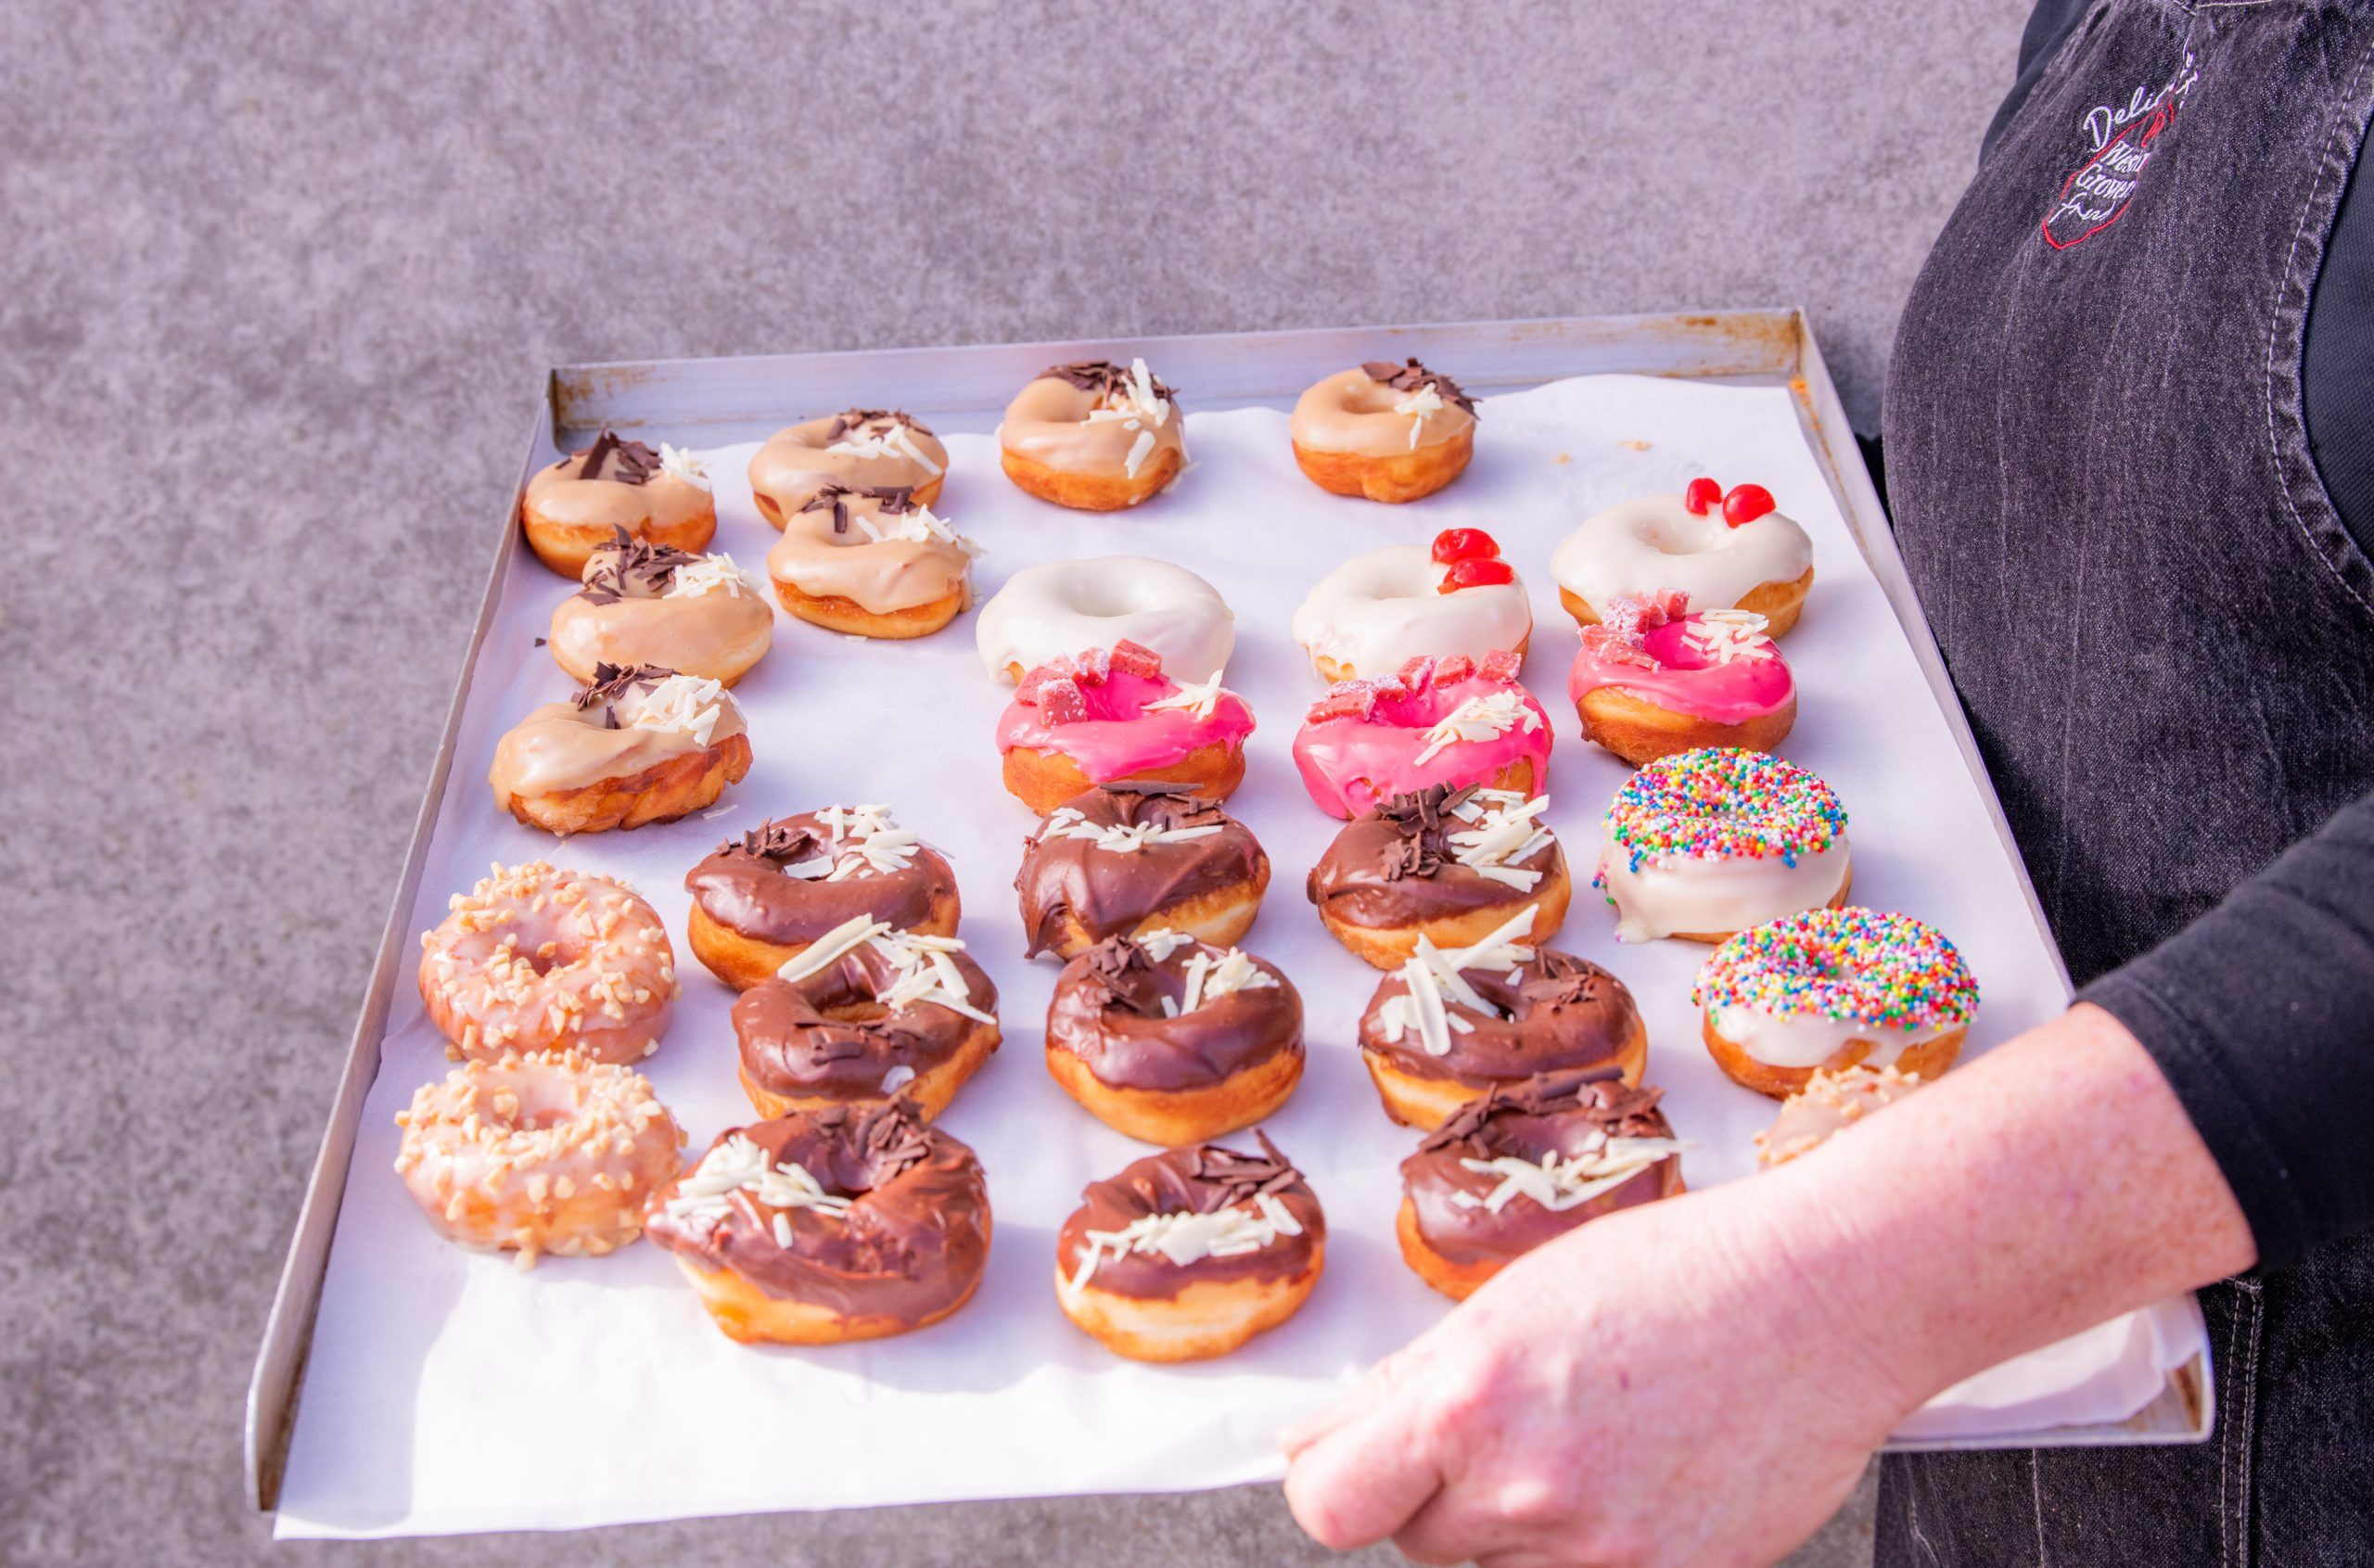 A tray of freshly baked, pink donuts made at Western Growers Fresh, Busselton